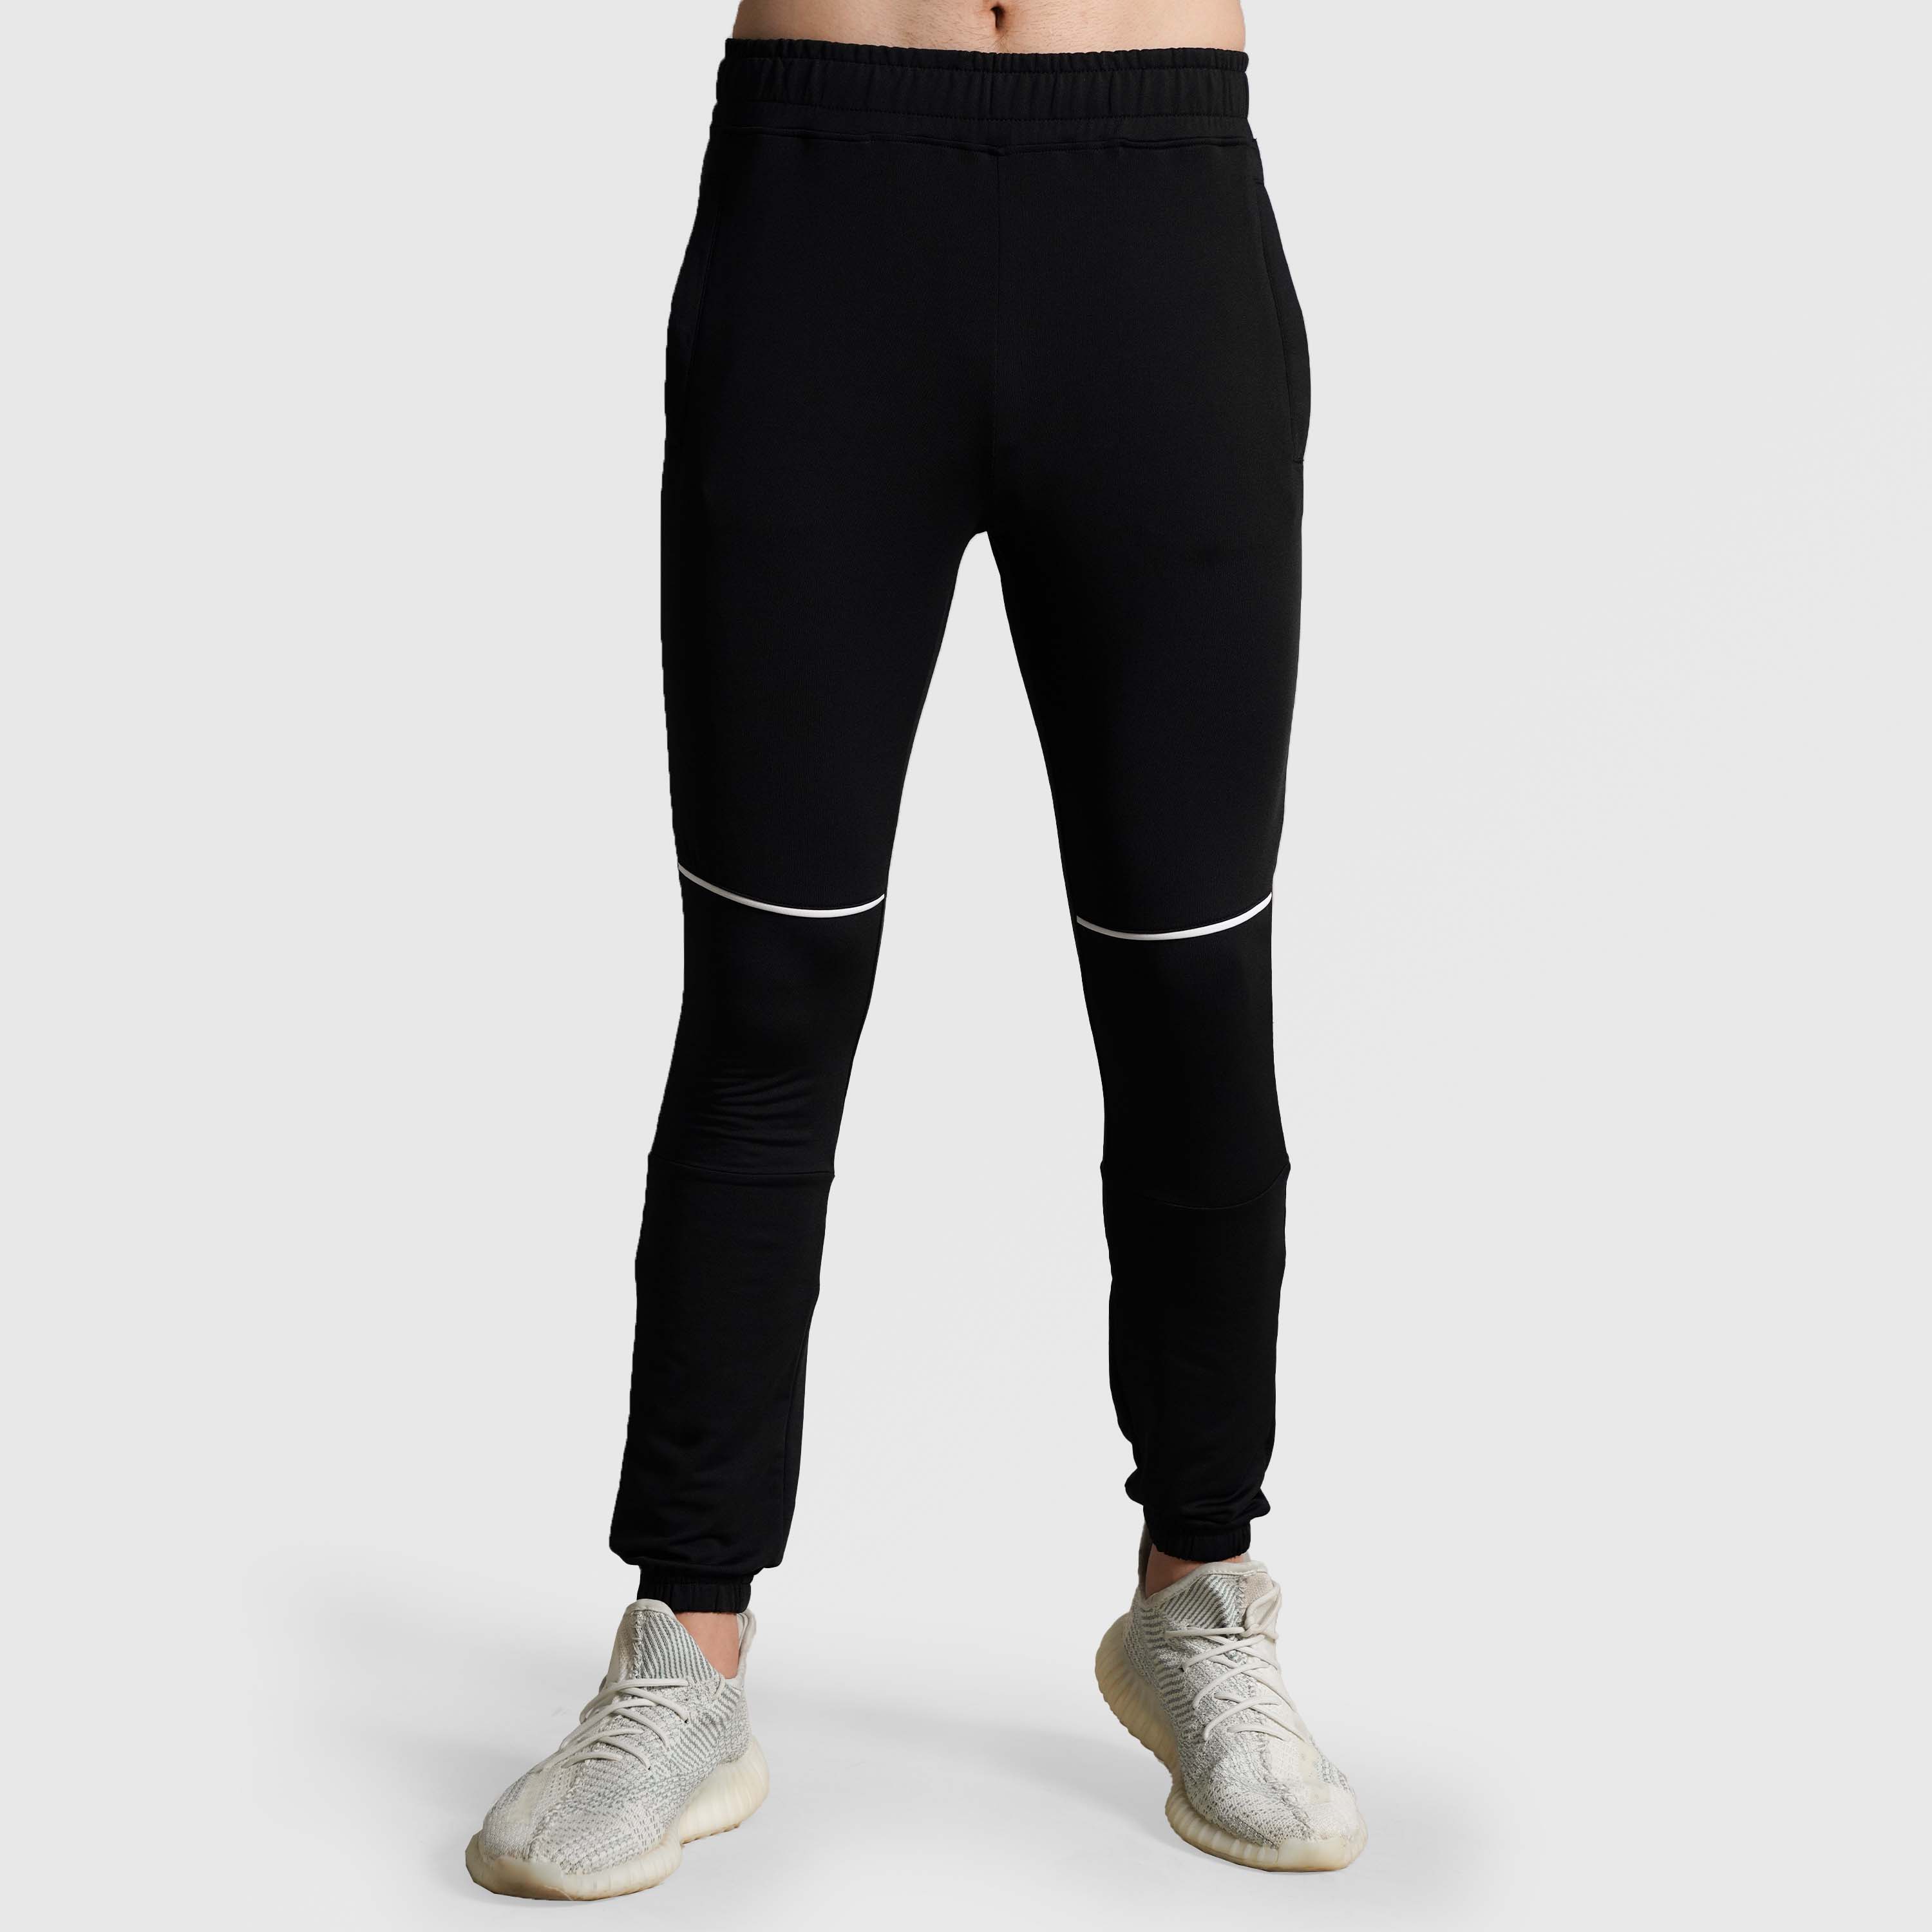 Pack Of 2 Jogger Trousers For Men - #1 Online Shopping Store in Pakistan  with Real Product Reviews